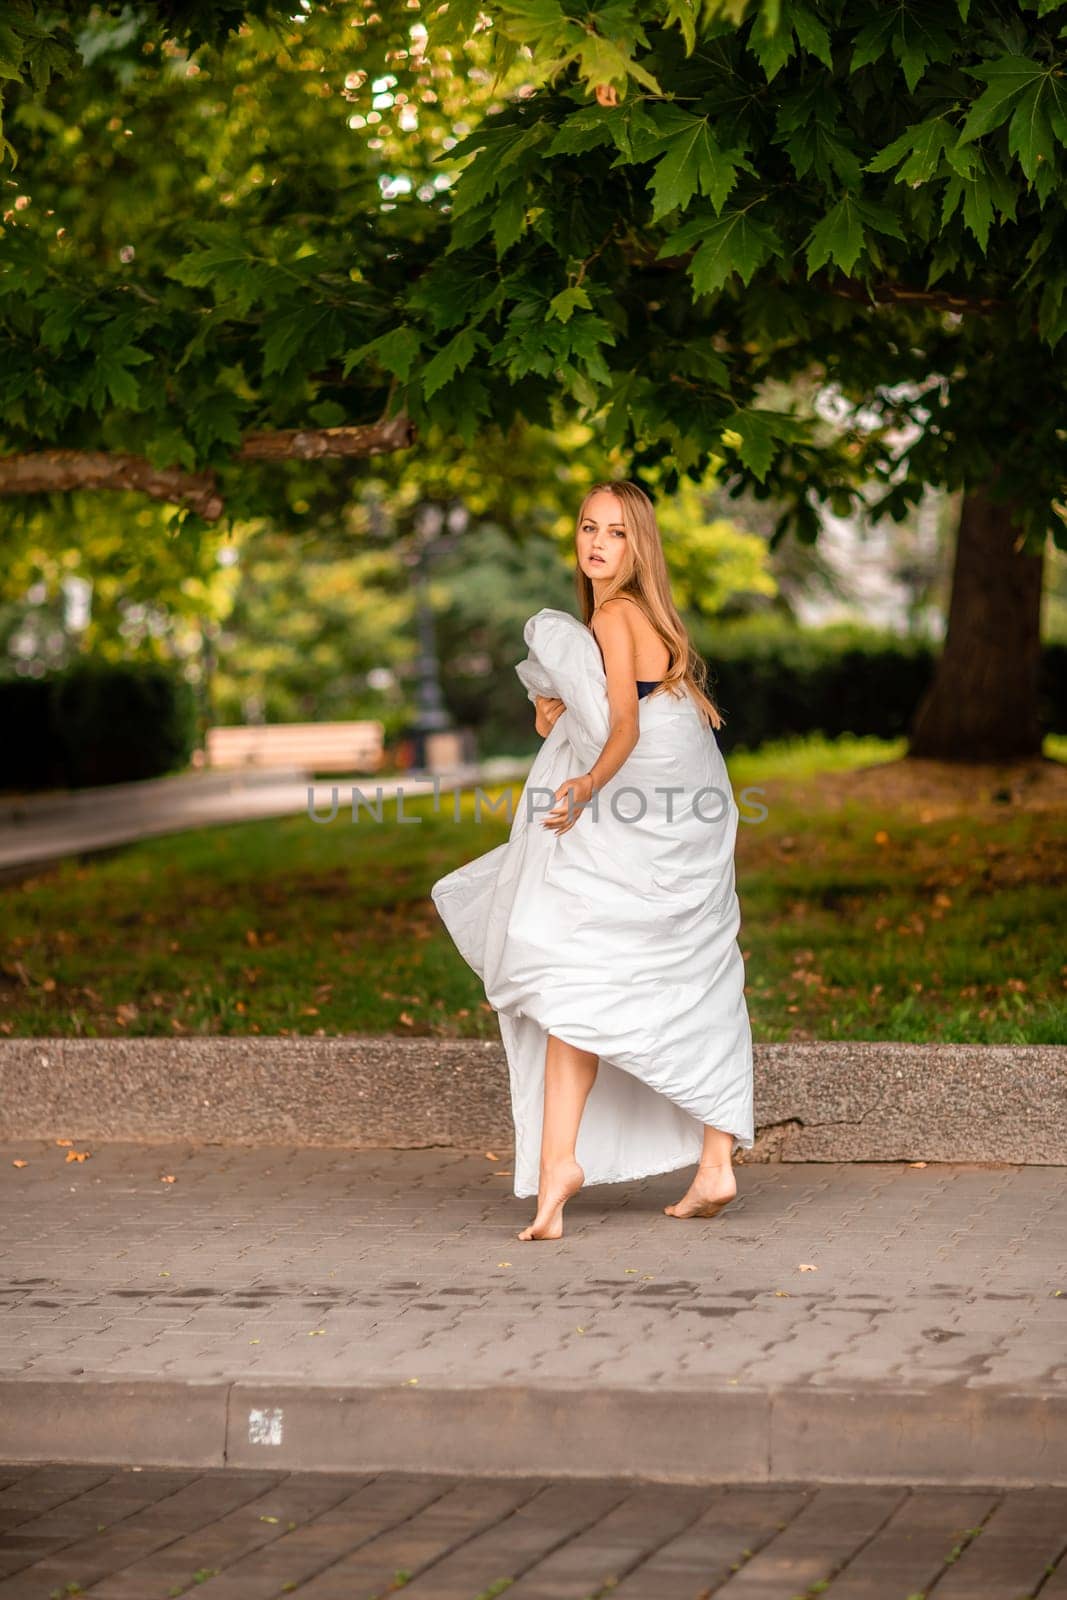 Woman city blanket. Morning in the big city. A blonde woman in a white blanket is enjoying in the city center. Photographed for social media.